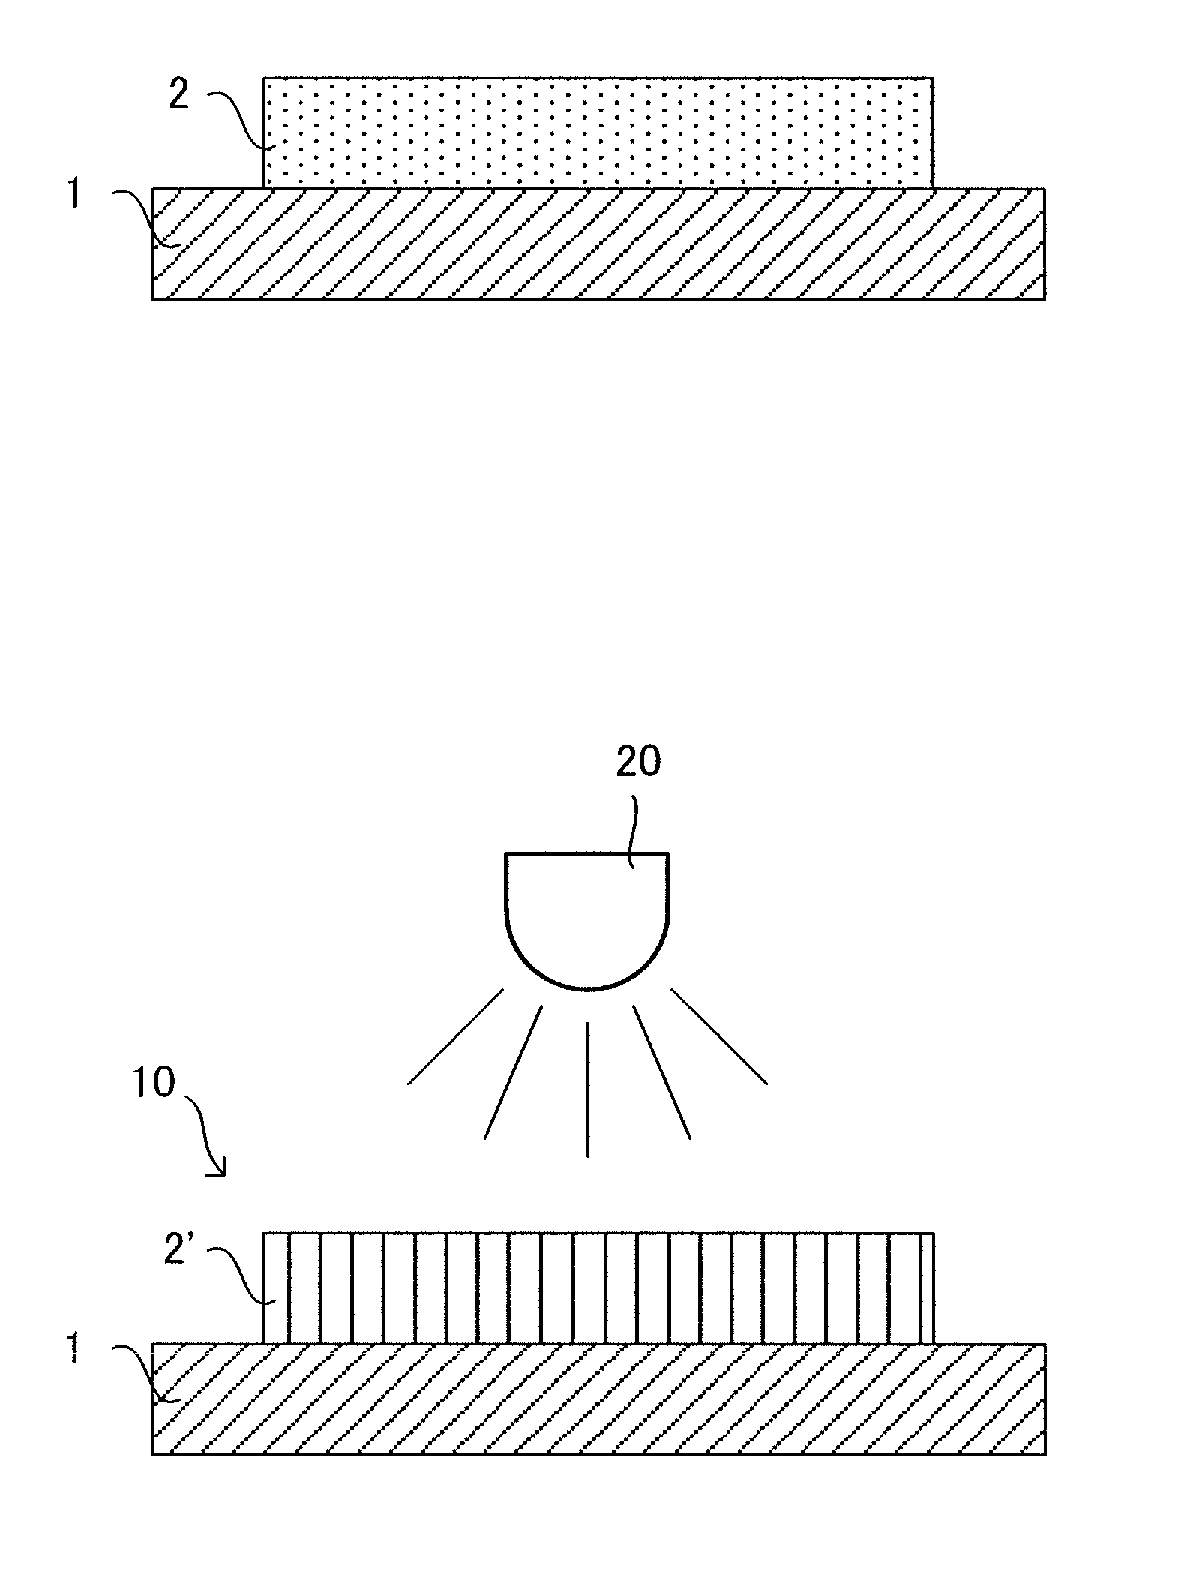 Magnetic recording medium and production method of magnetic recording medium